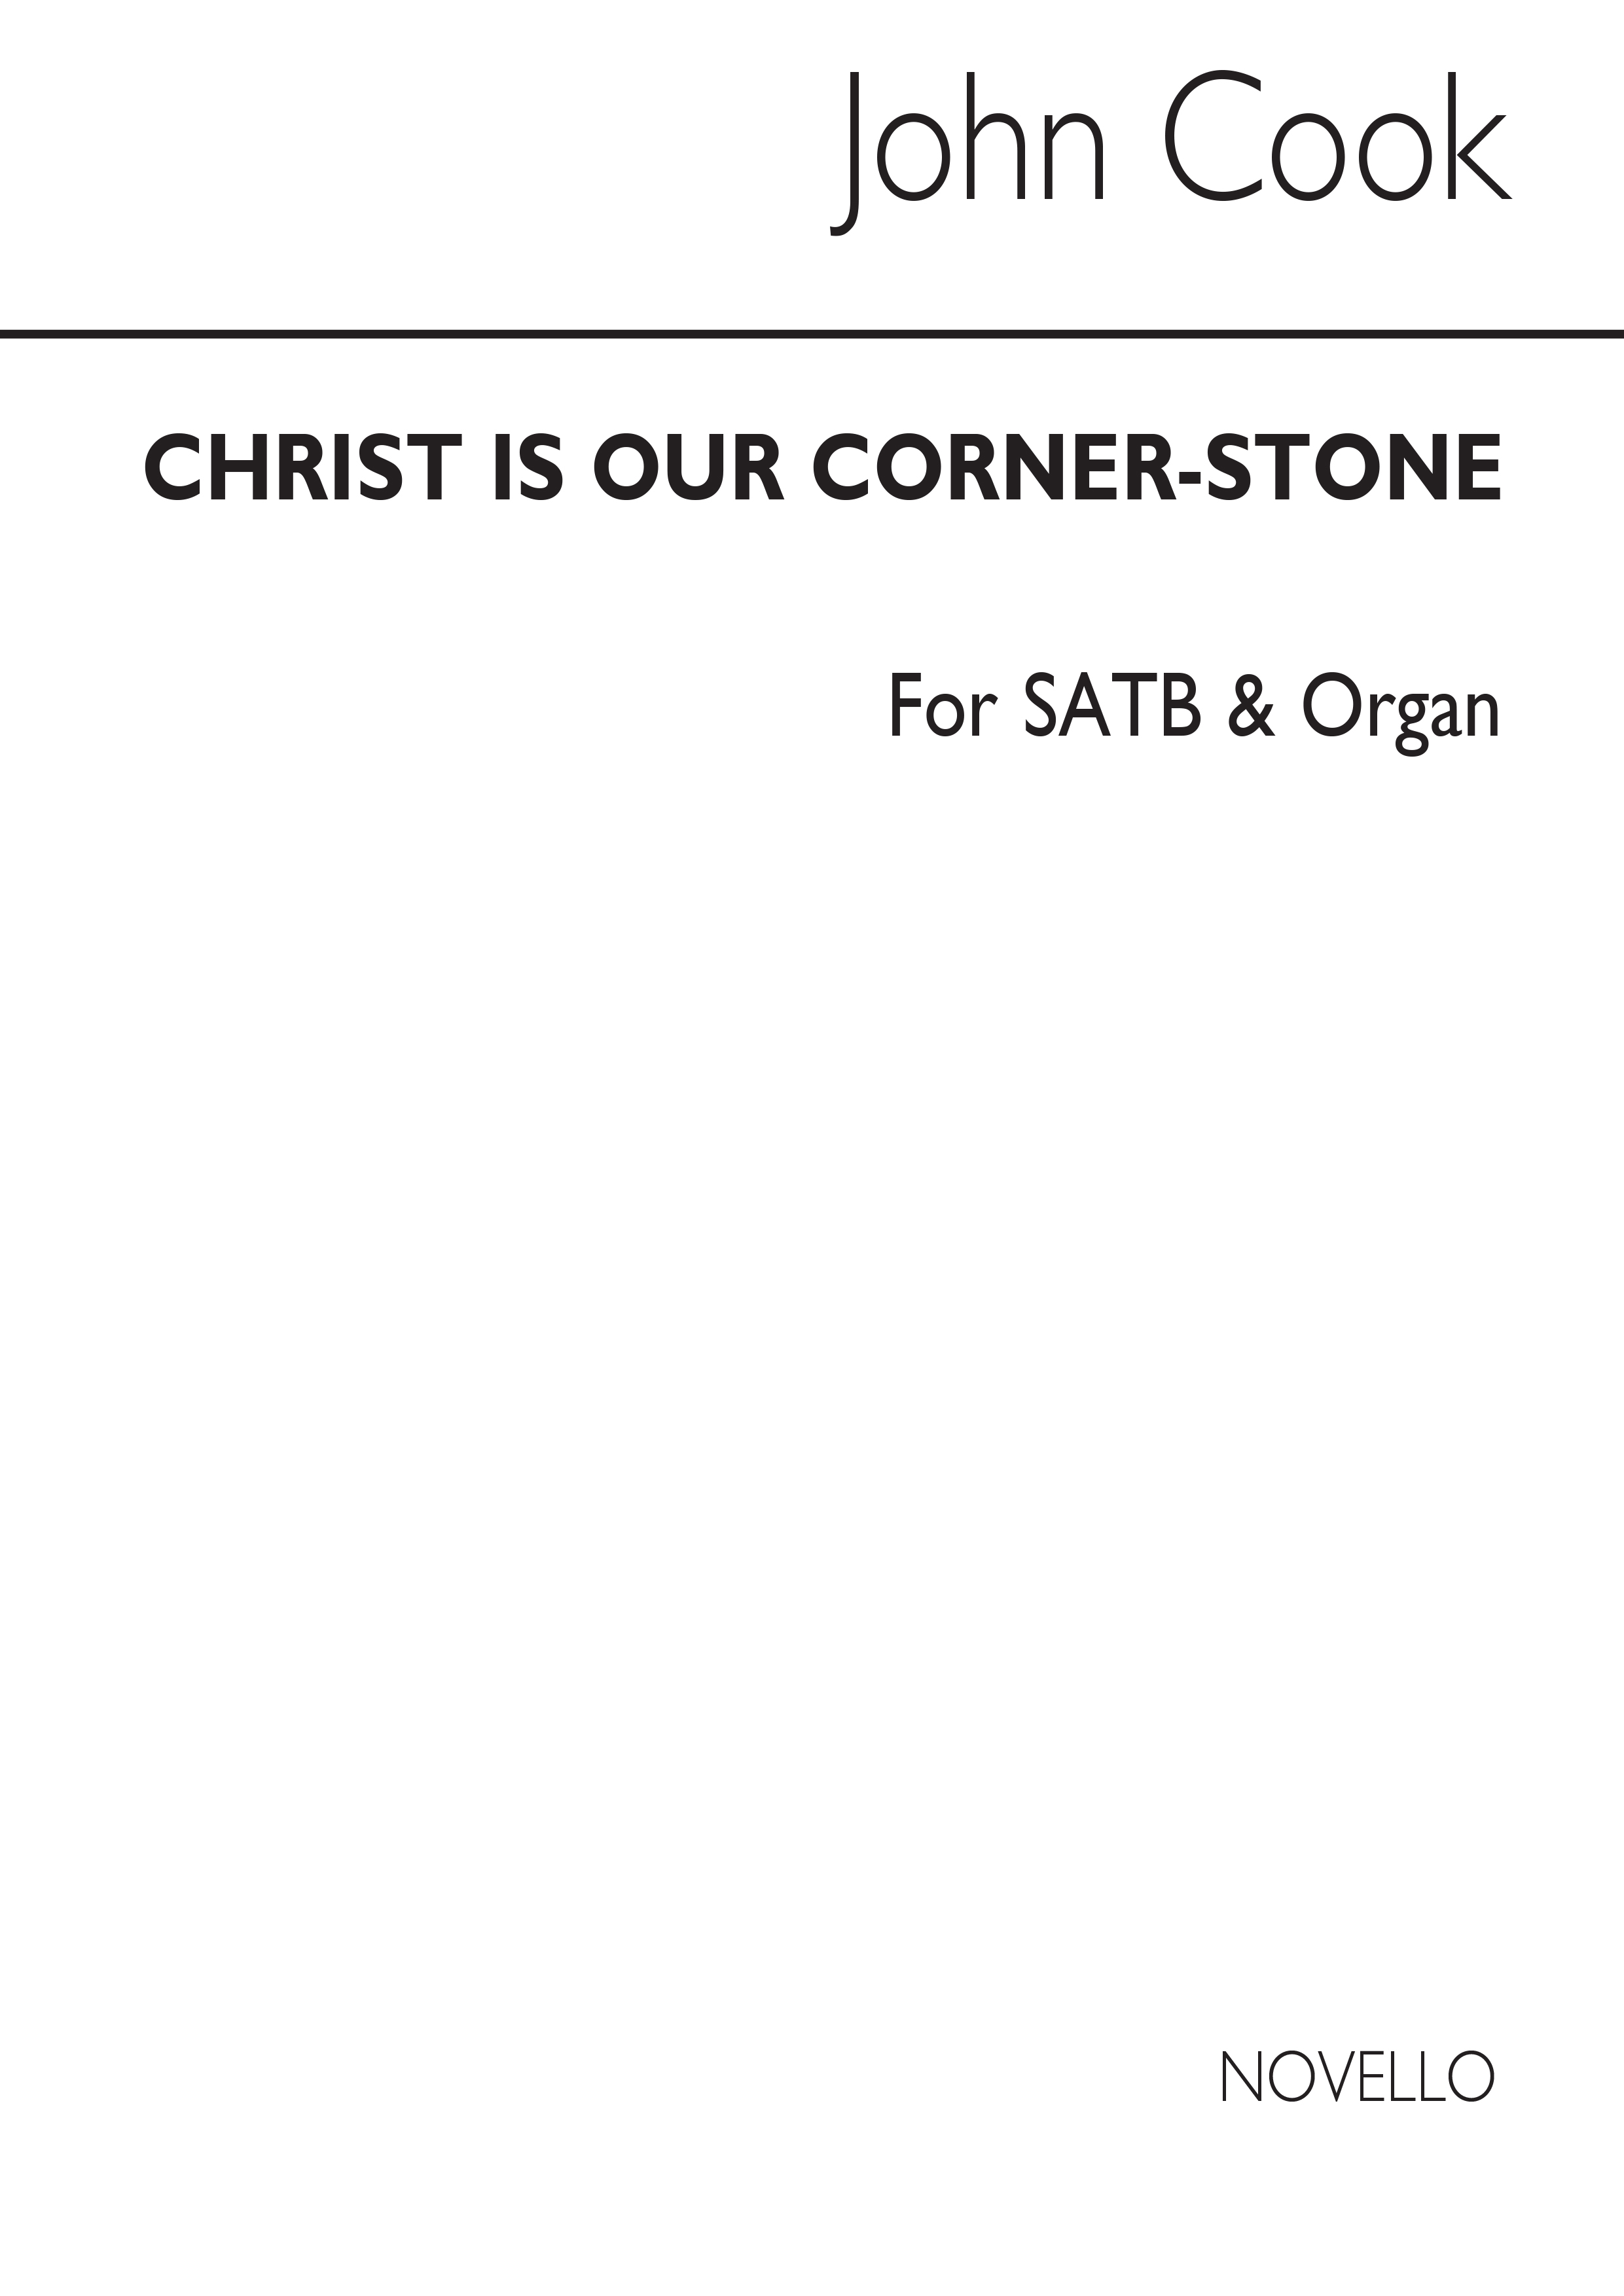 John Cook: Christ Is Our Corner Stone